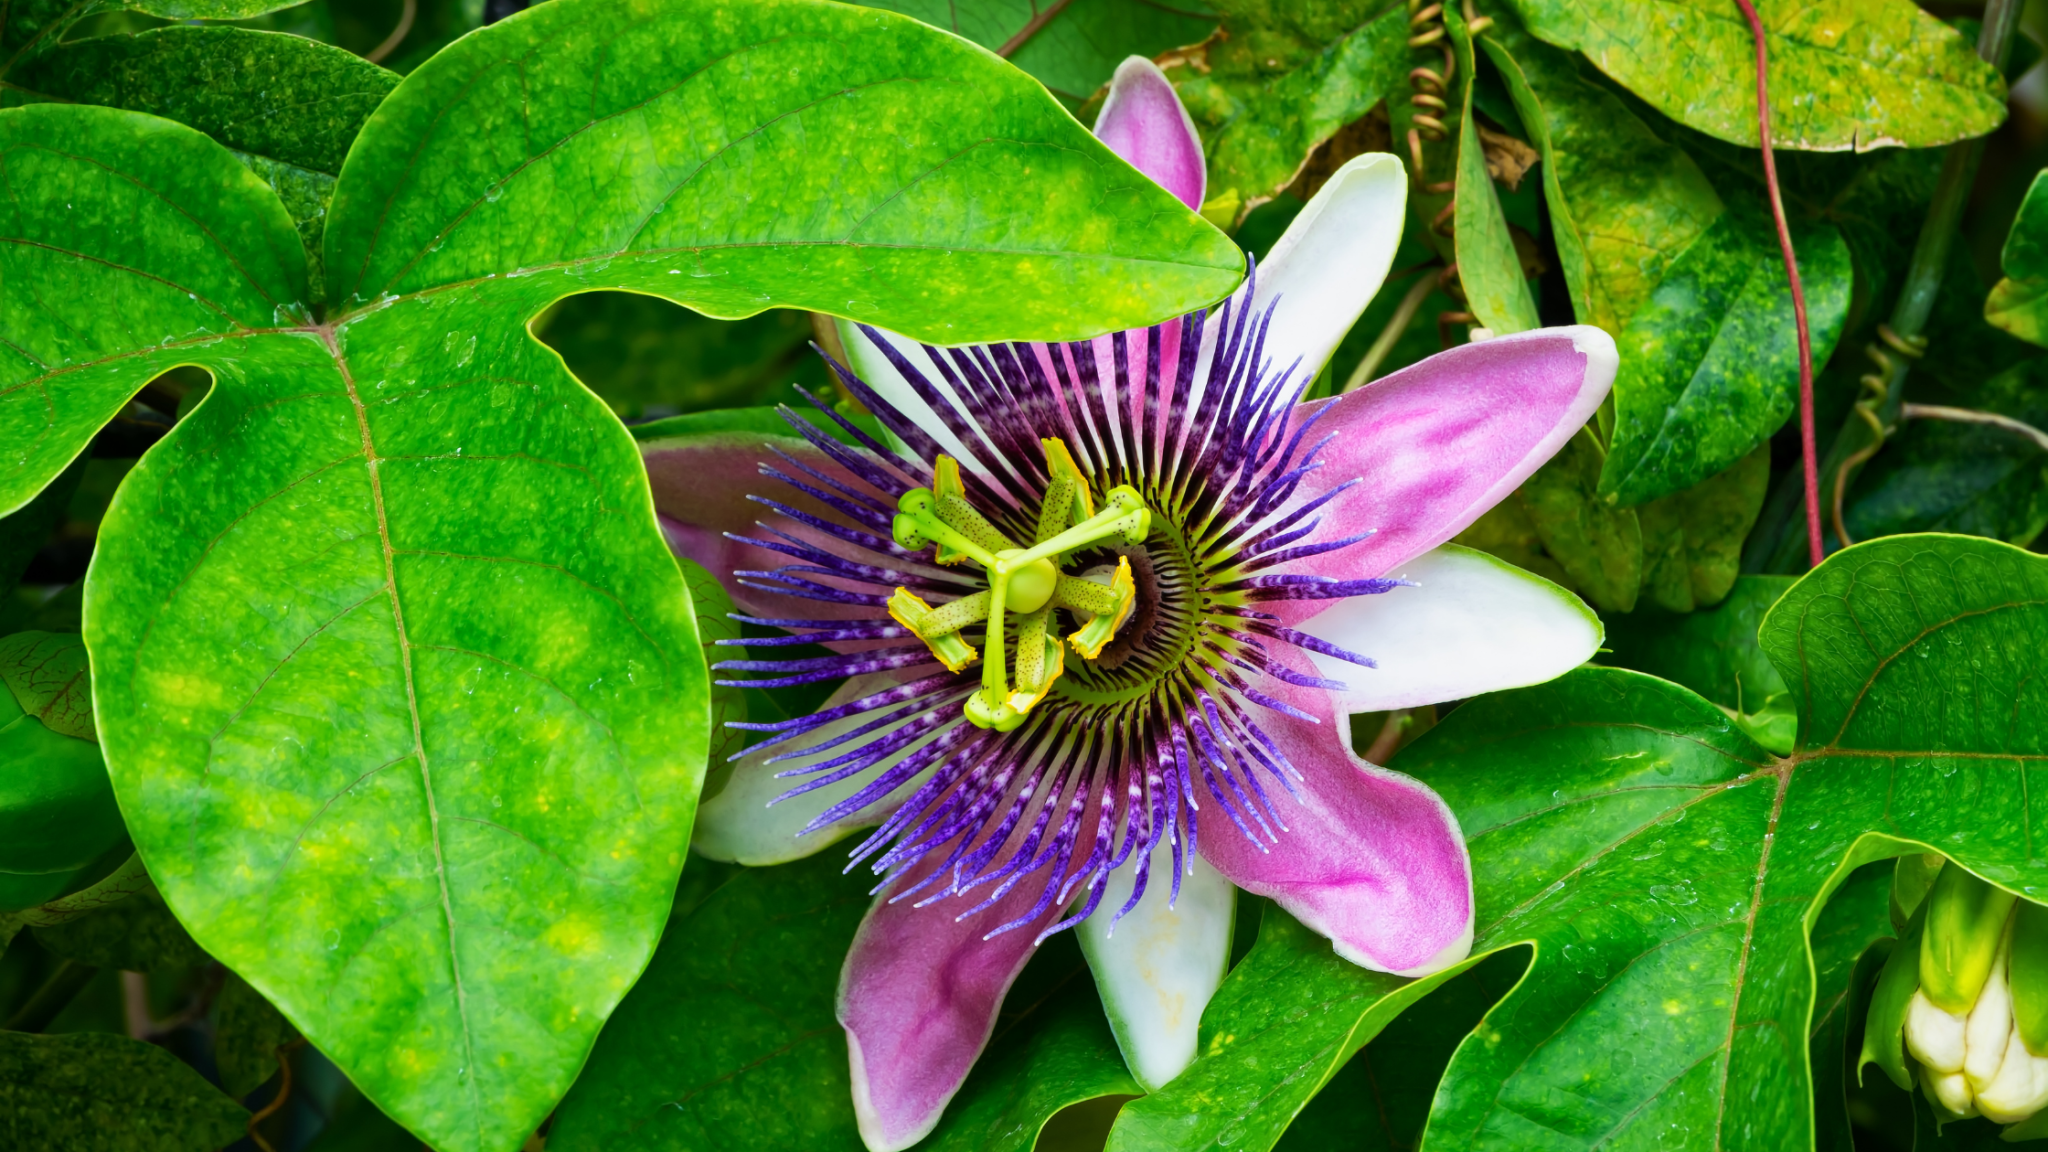 passionflower is one of the herbs to relieve anxiety